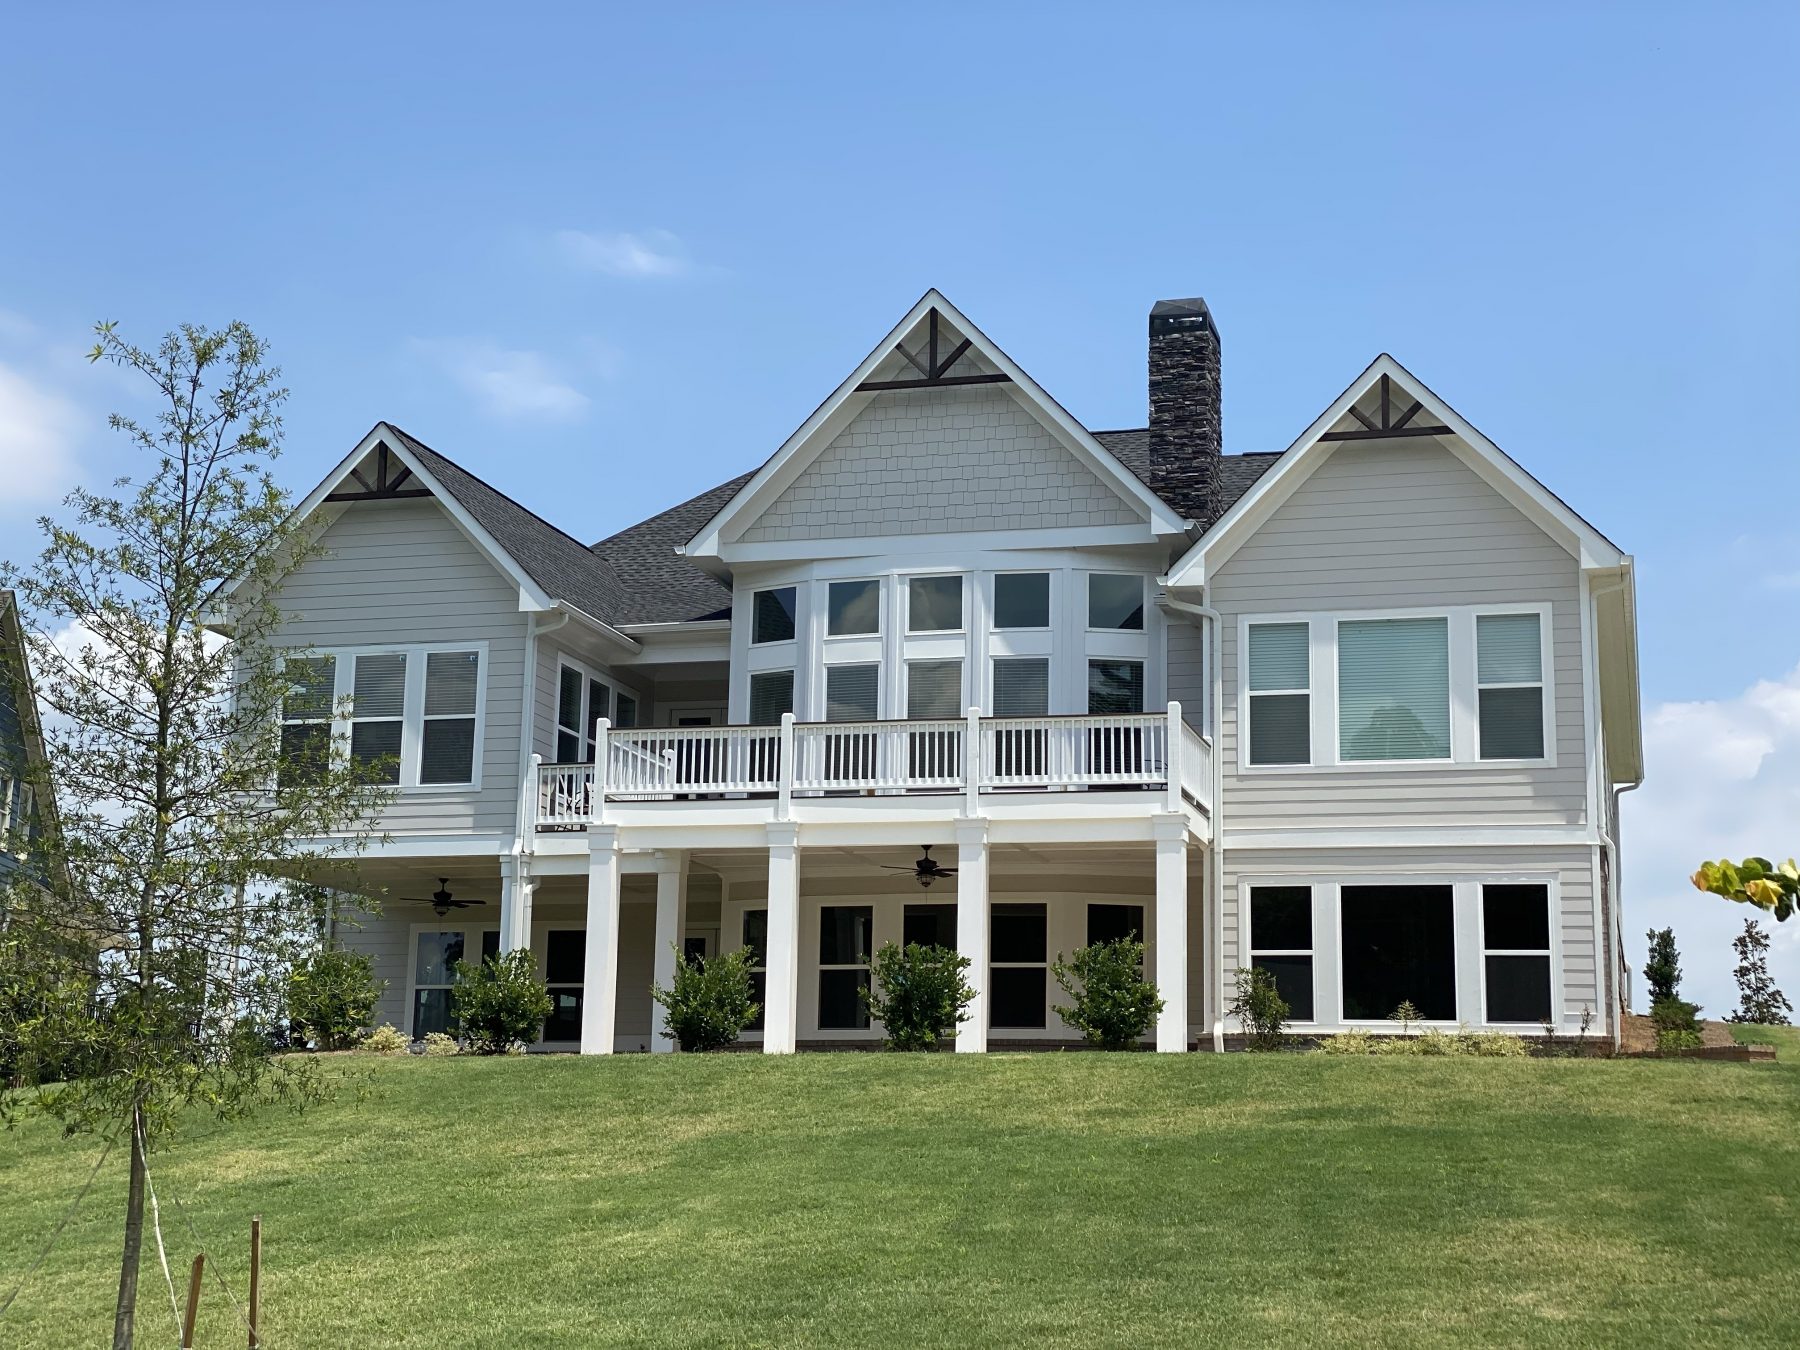 Traditions of Braselton Luxury Homes